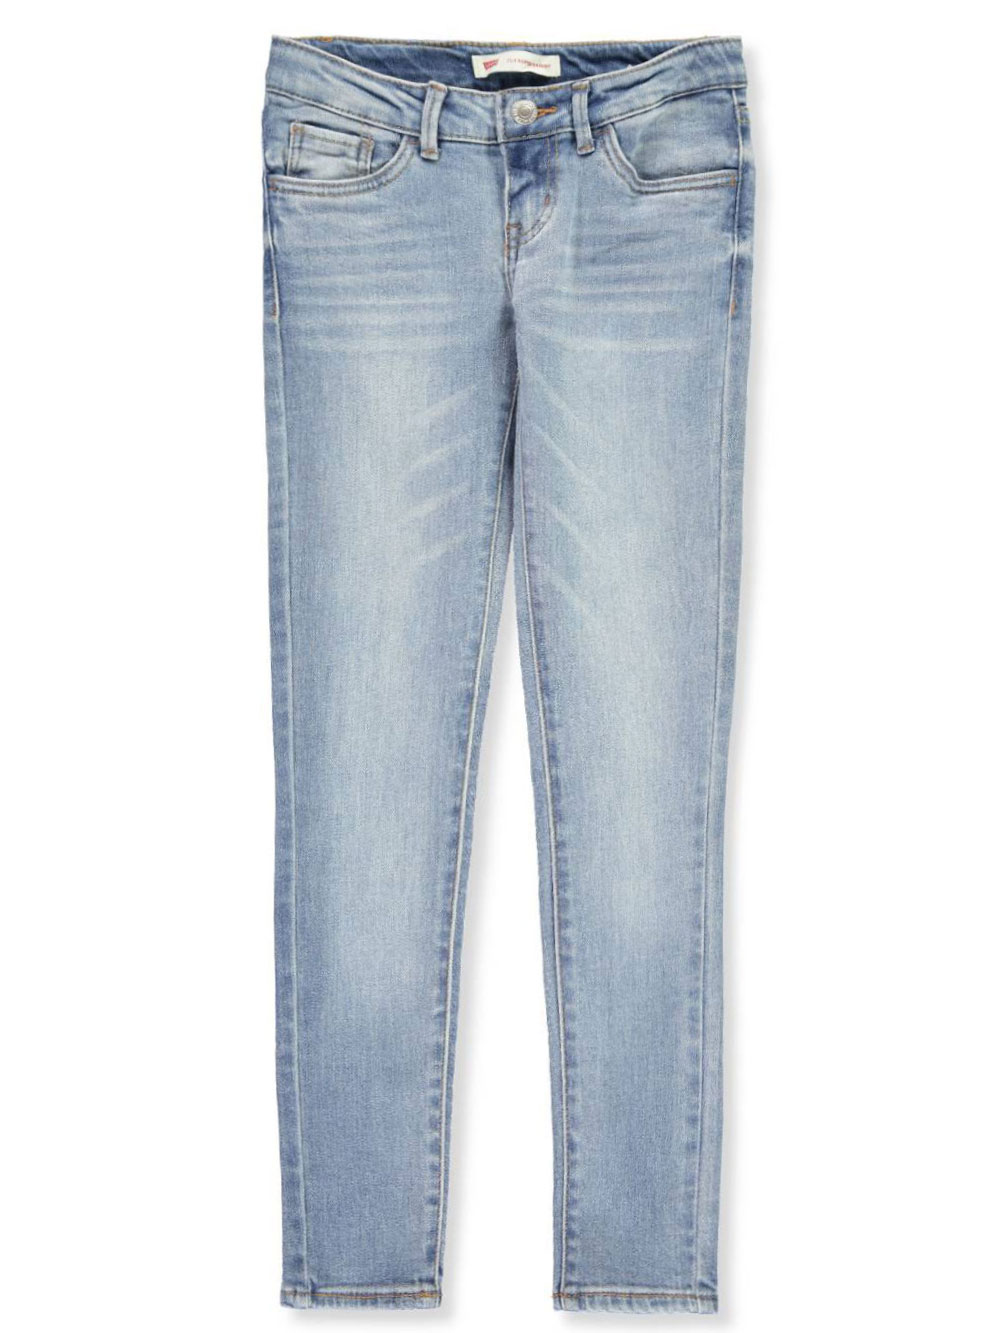 710 jeans